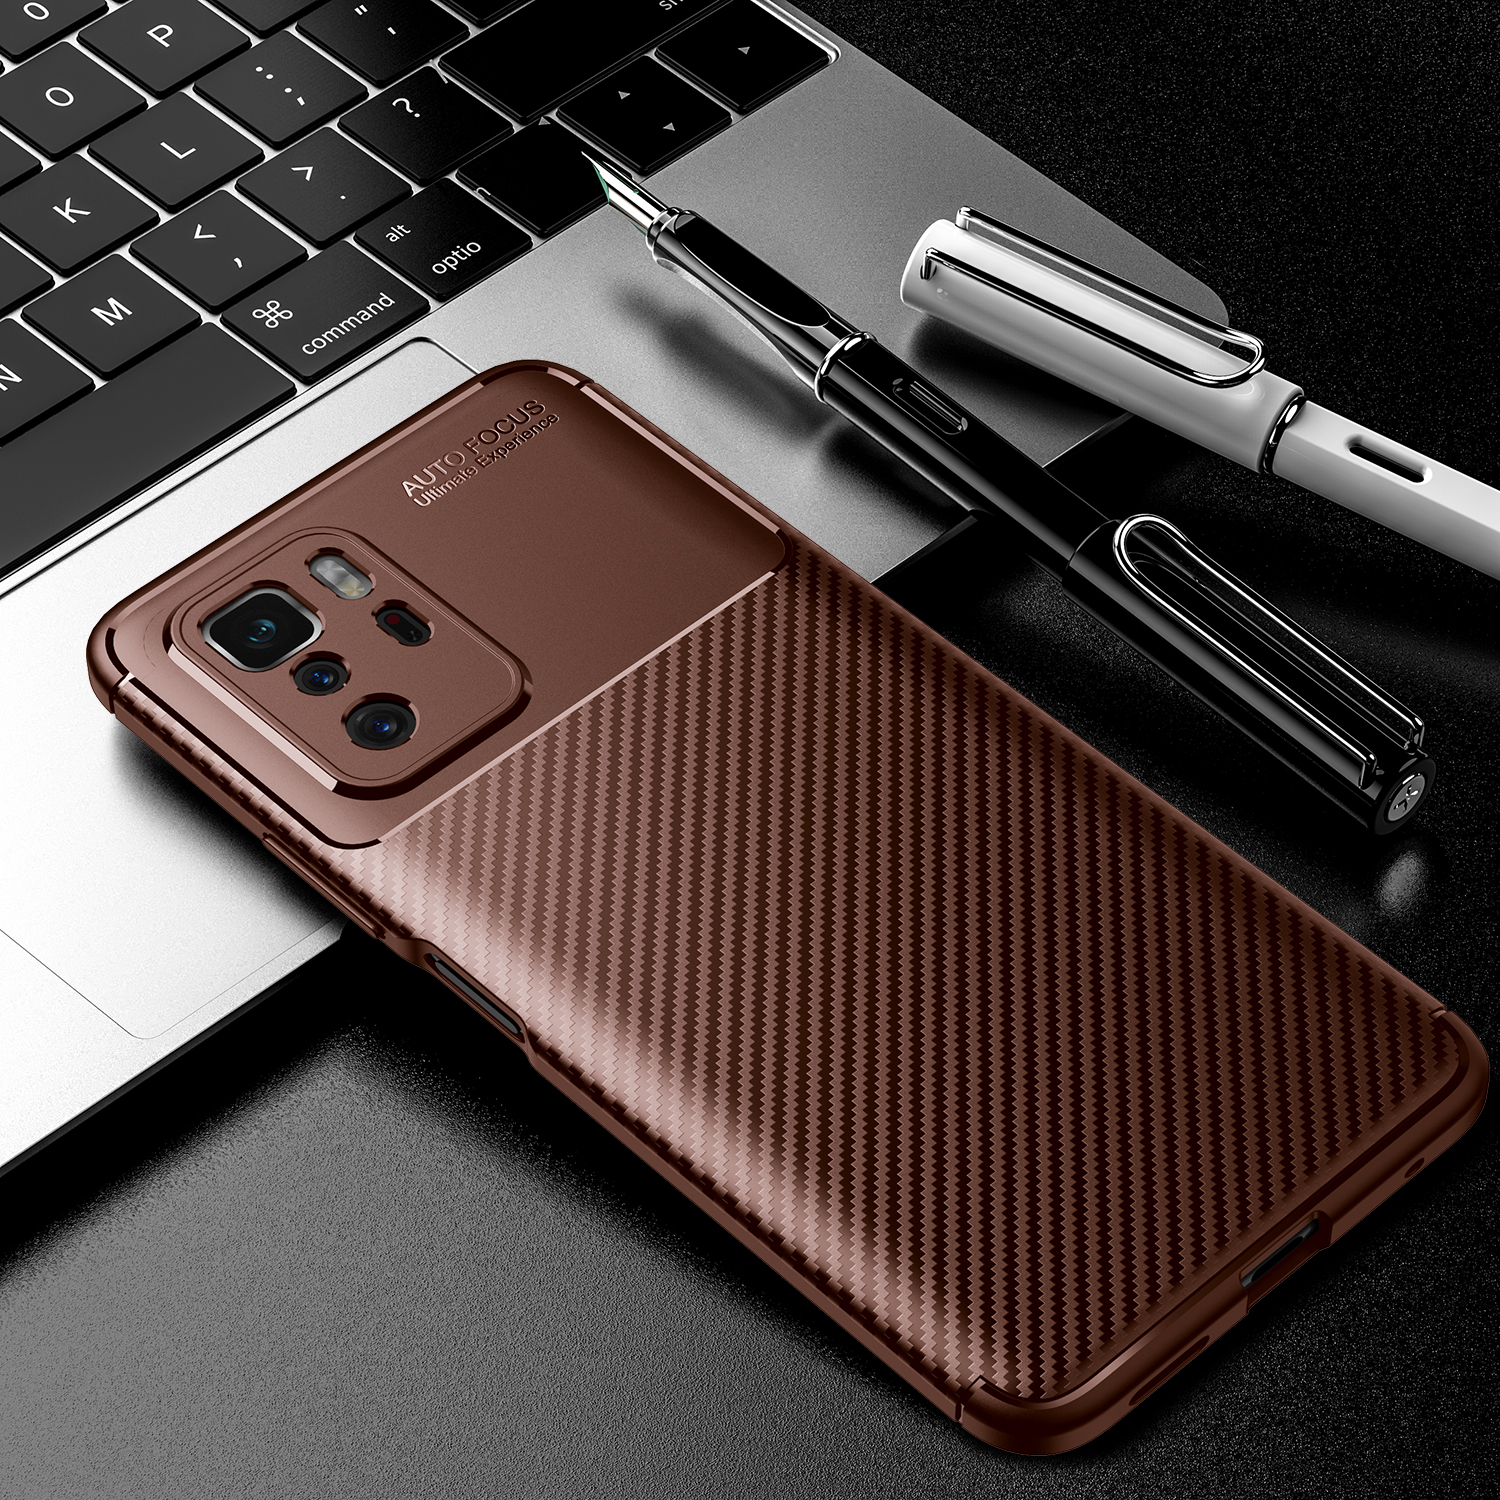 Bakeey-for-Xiaomi-Redmi-Note-10-Pro-5G-Case-Luxury-Carbon-Fiber-Pattern-Shockproof-Silicone-Protecti-1866174-10